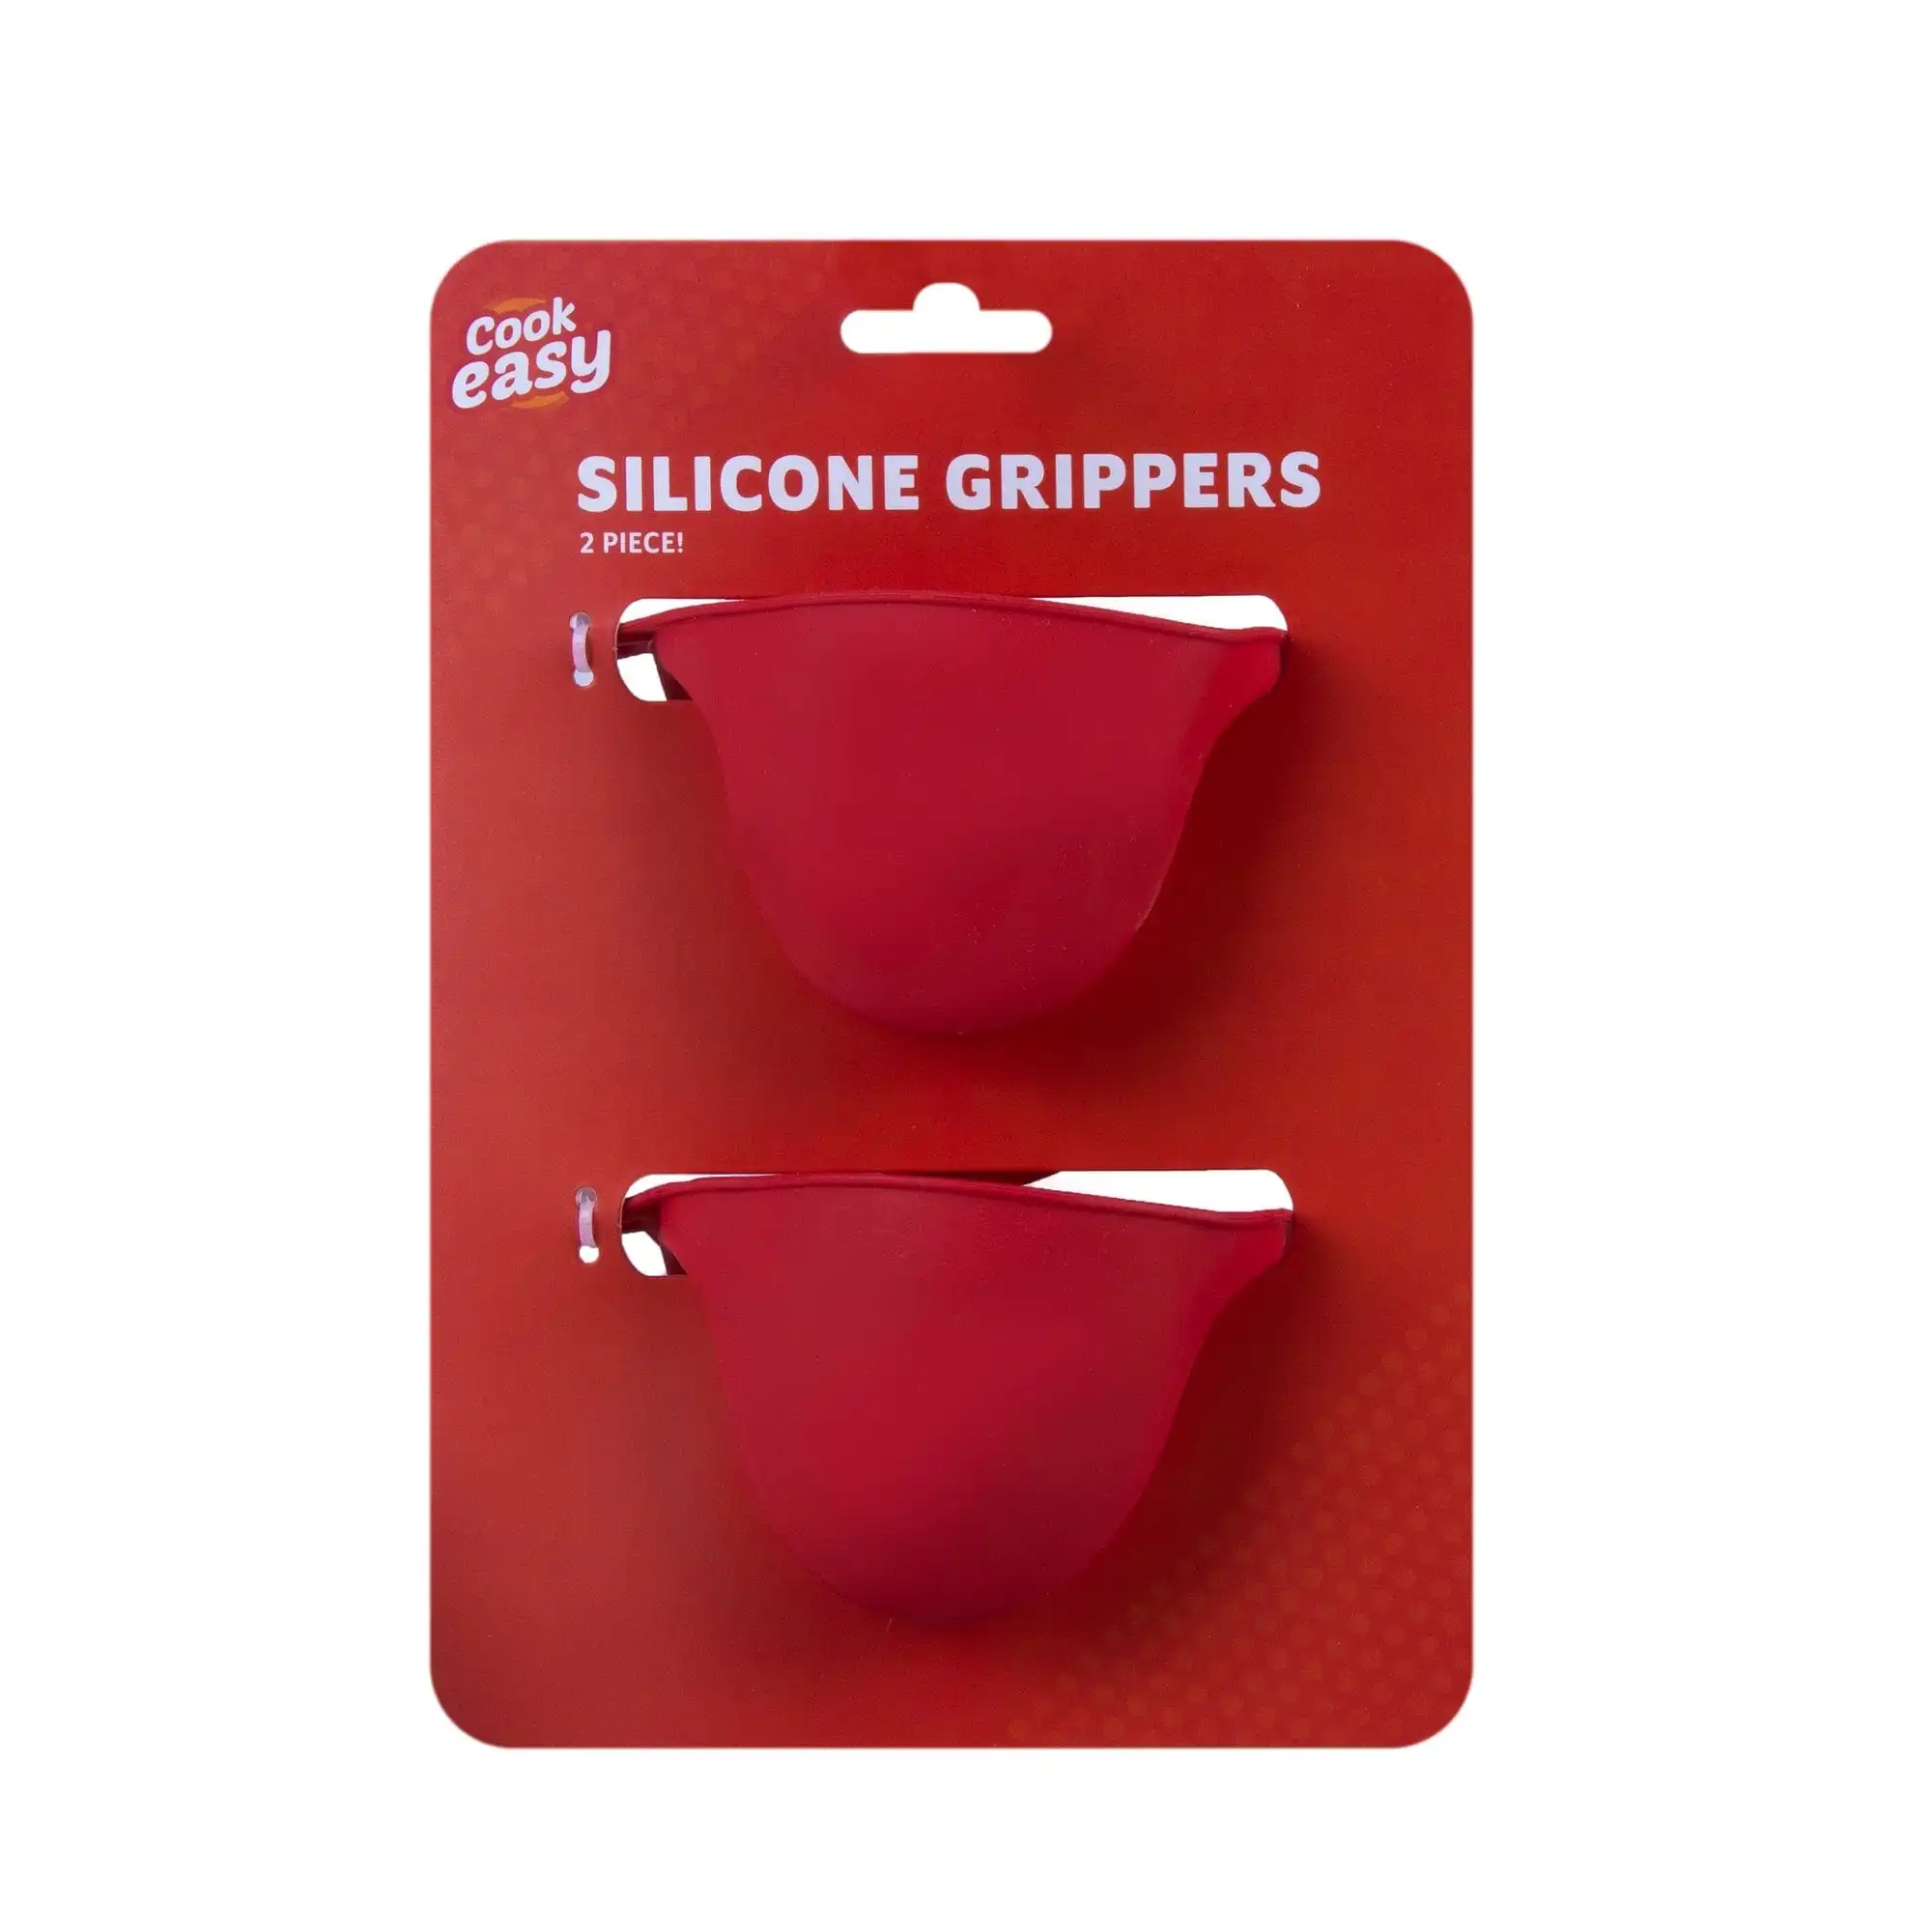 2PC Silicone Grippers